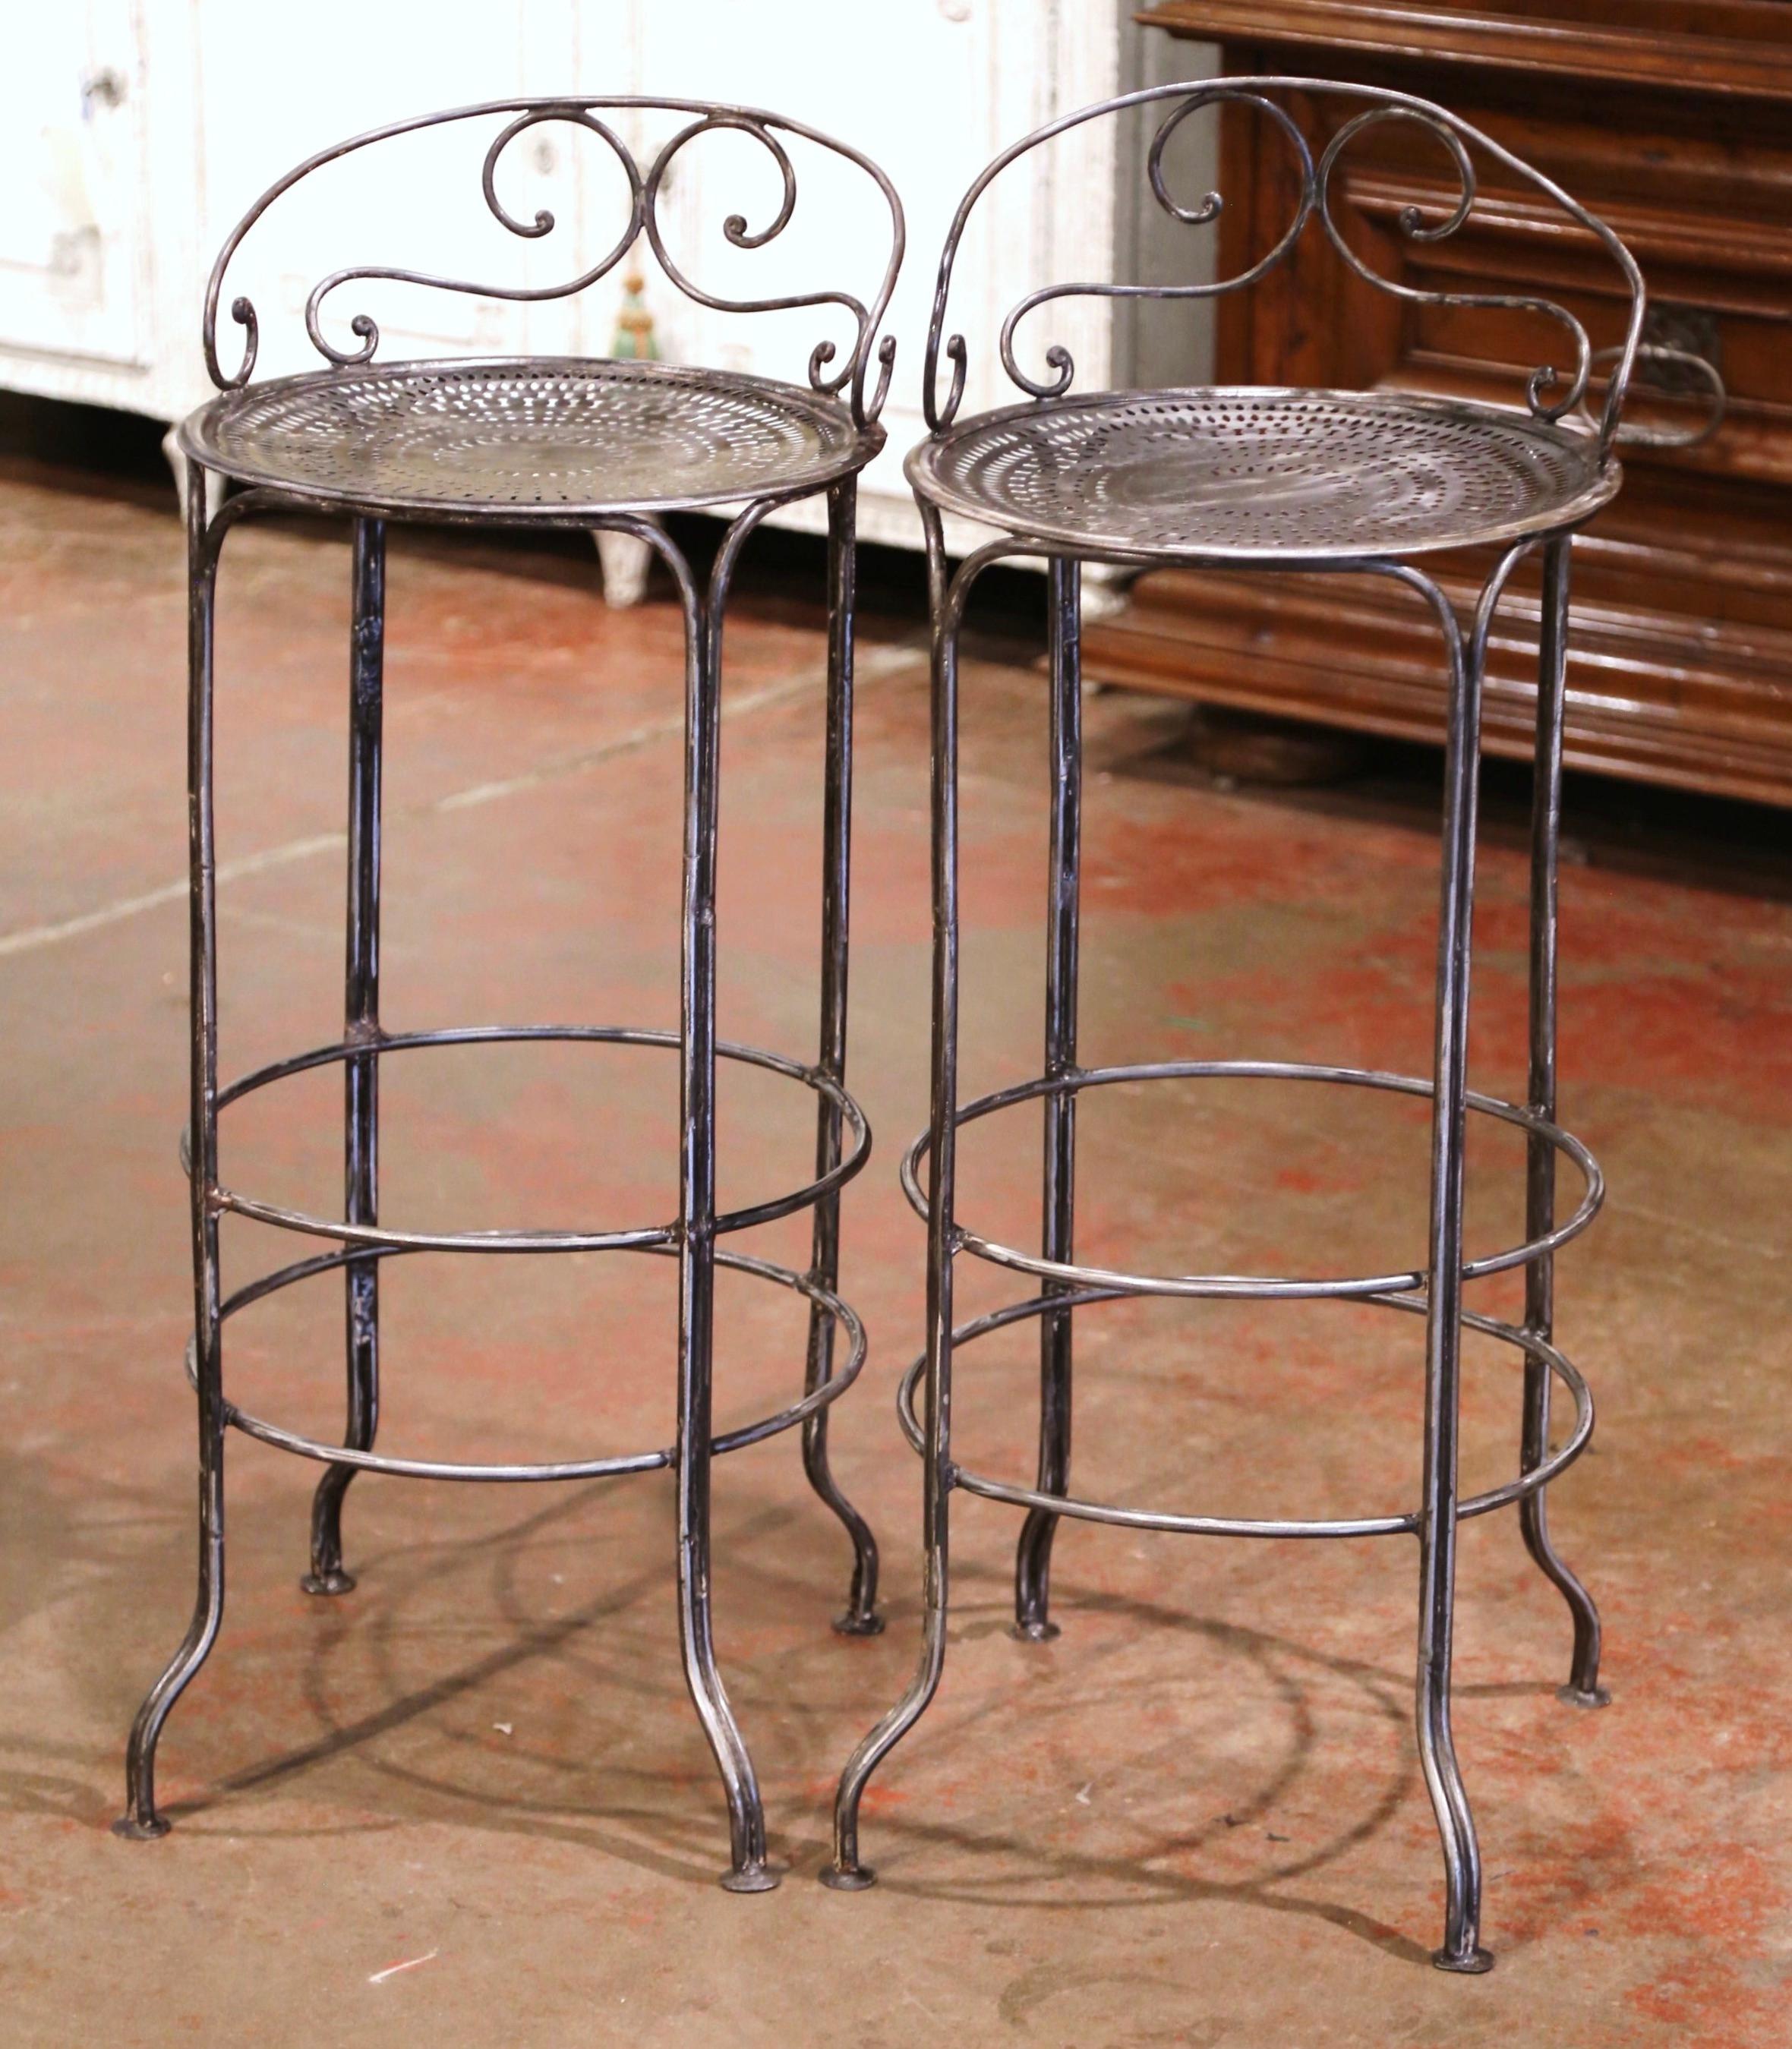 Place these two antique barstools around a bar, or outside around a pool counter! Crafted in France circa 1880 and made of forged iron, each sturdy chair stands on straight legs with curved feet, embellished with a circular double bottom footrest